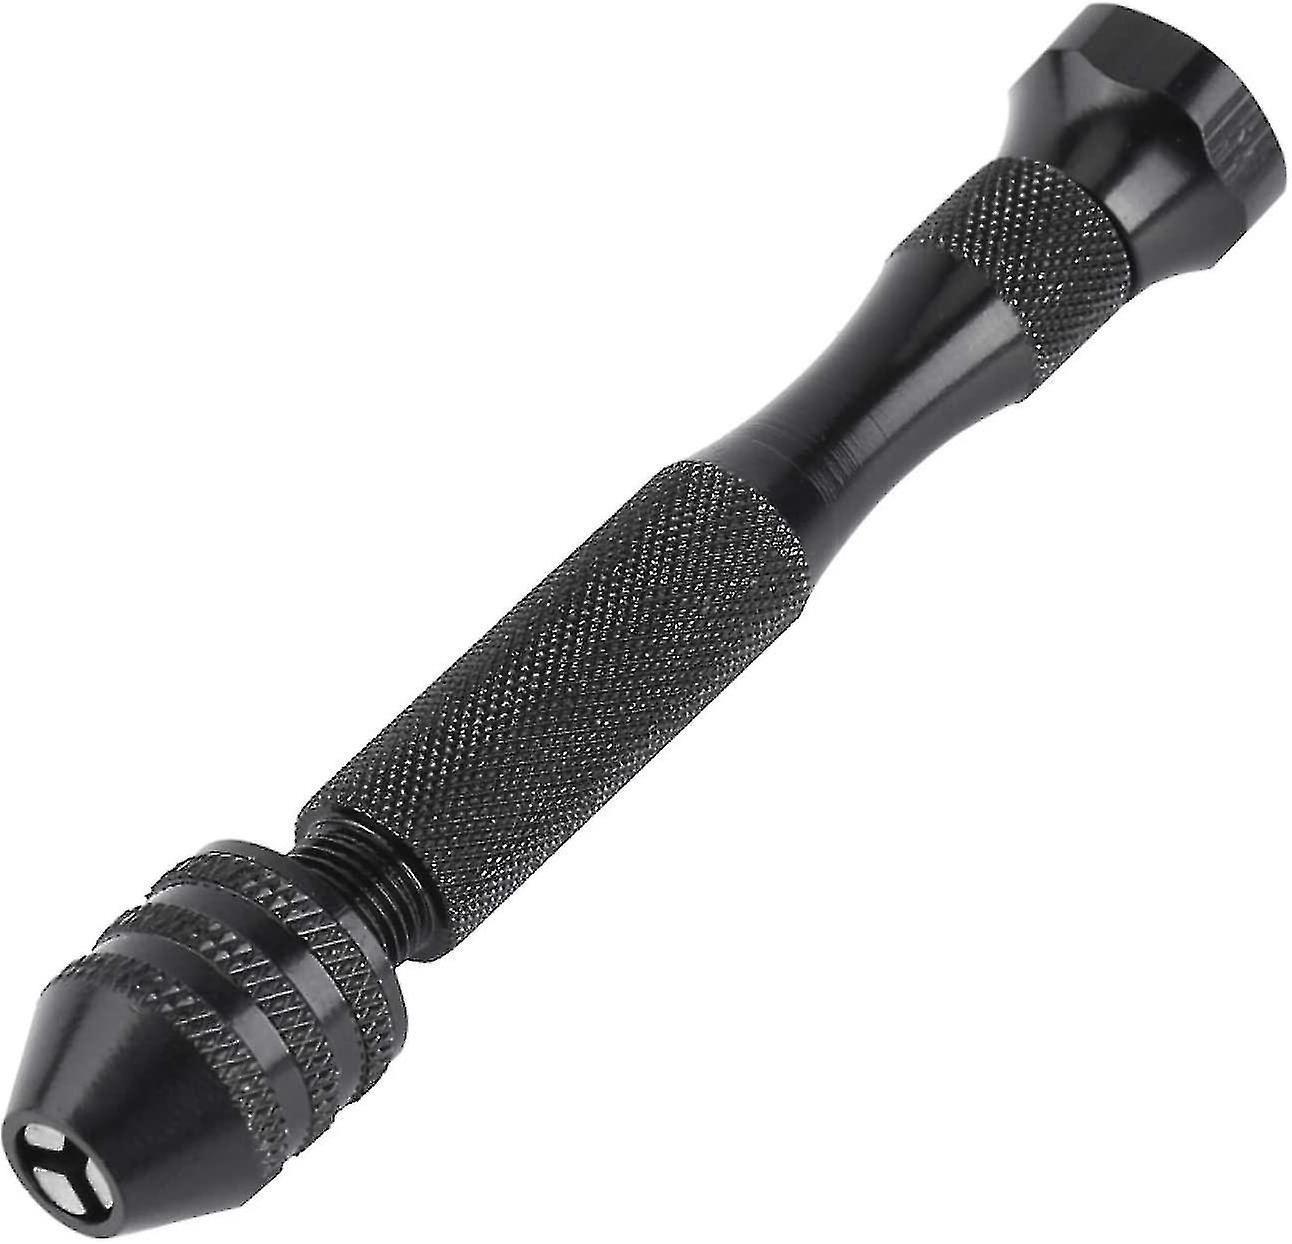 Hand Drill Woodworking Drill Hole Hand Punch Tool (1 Piece, Black)